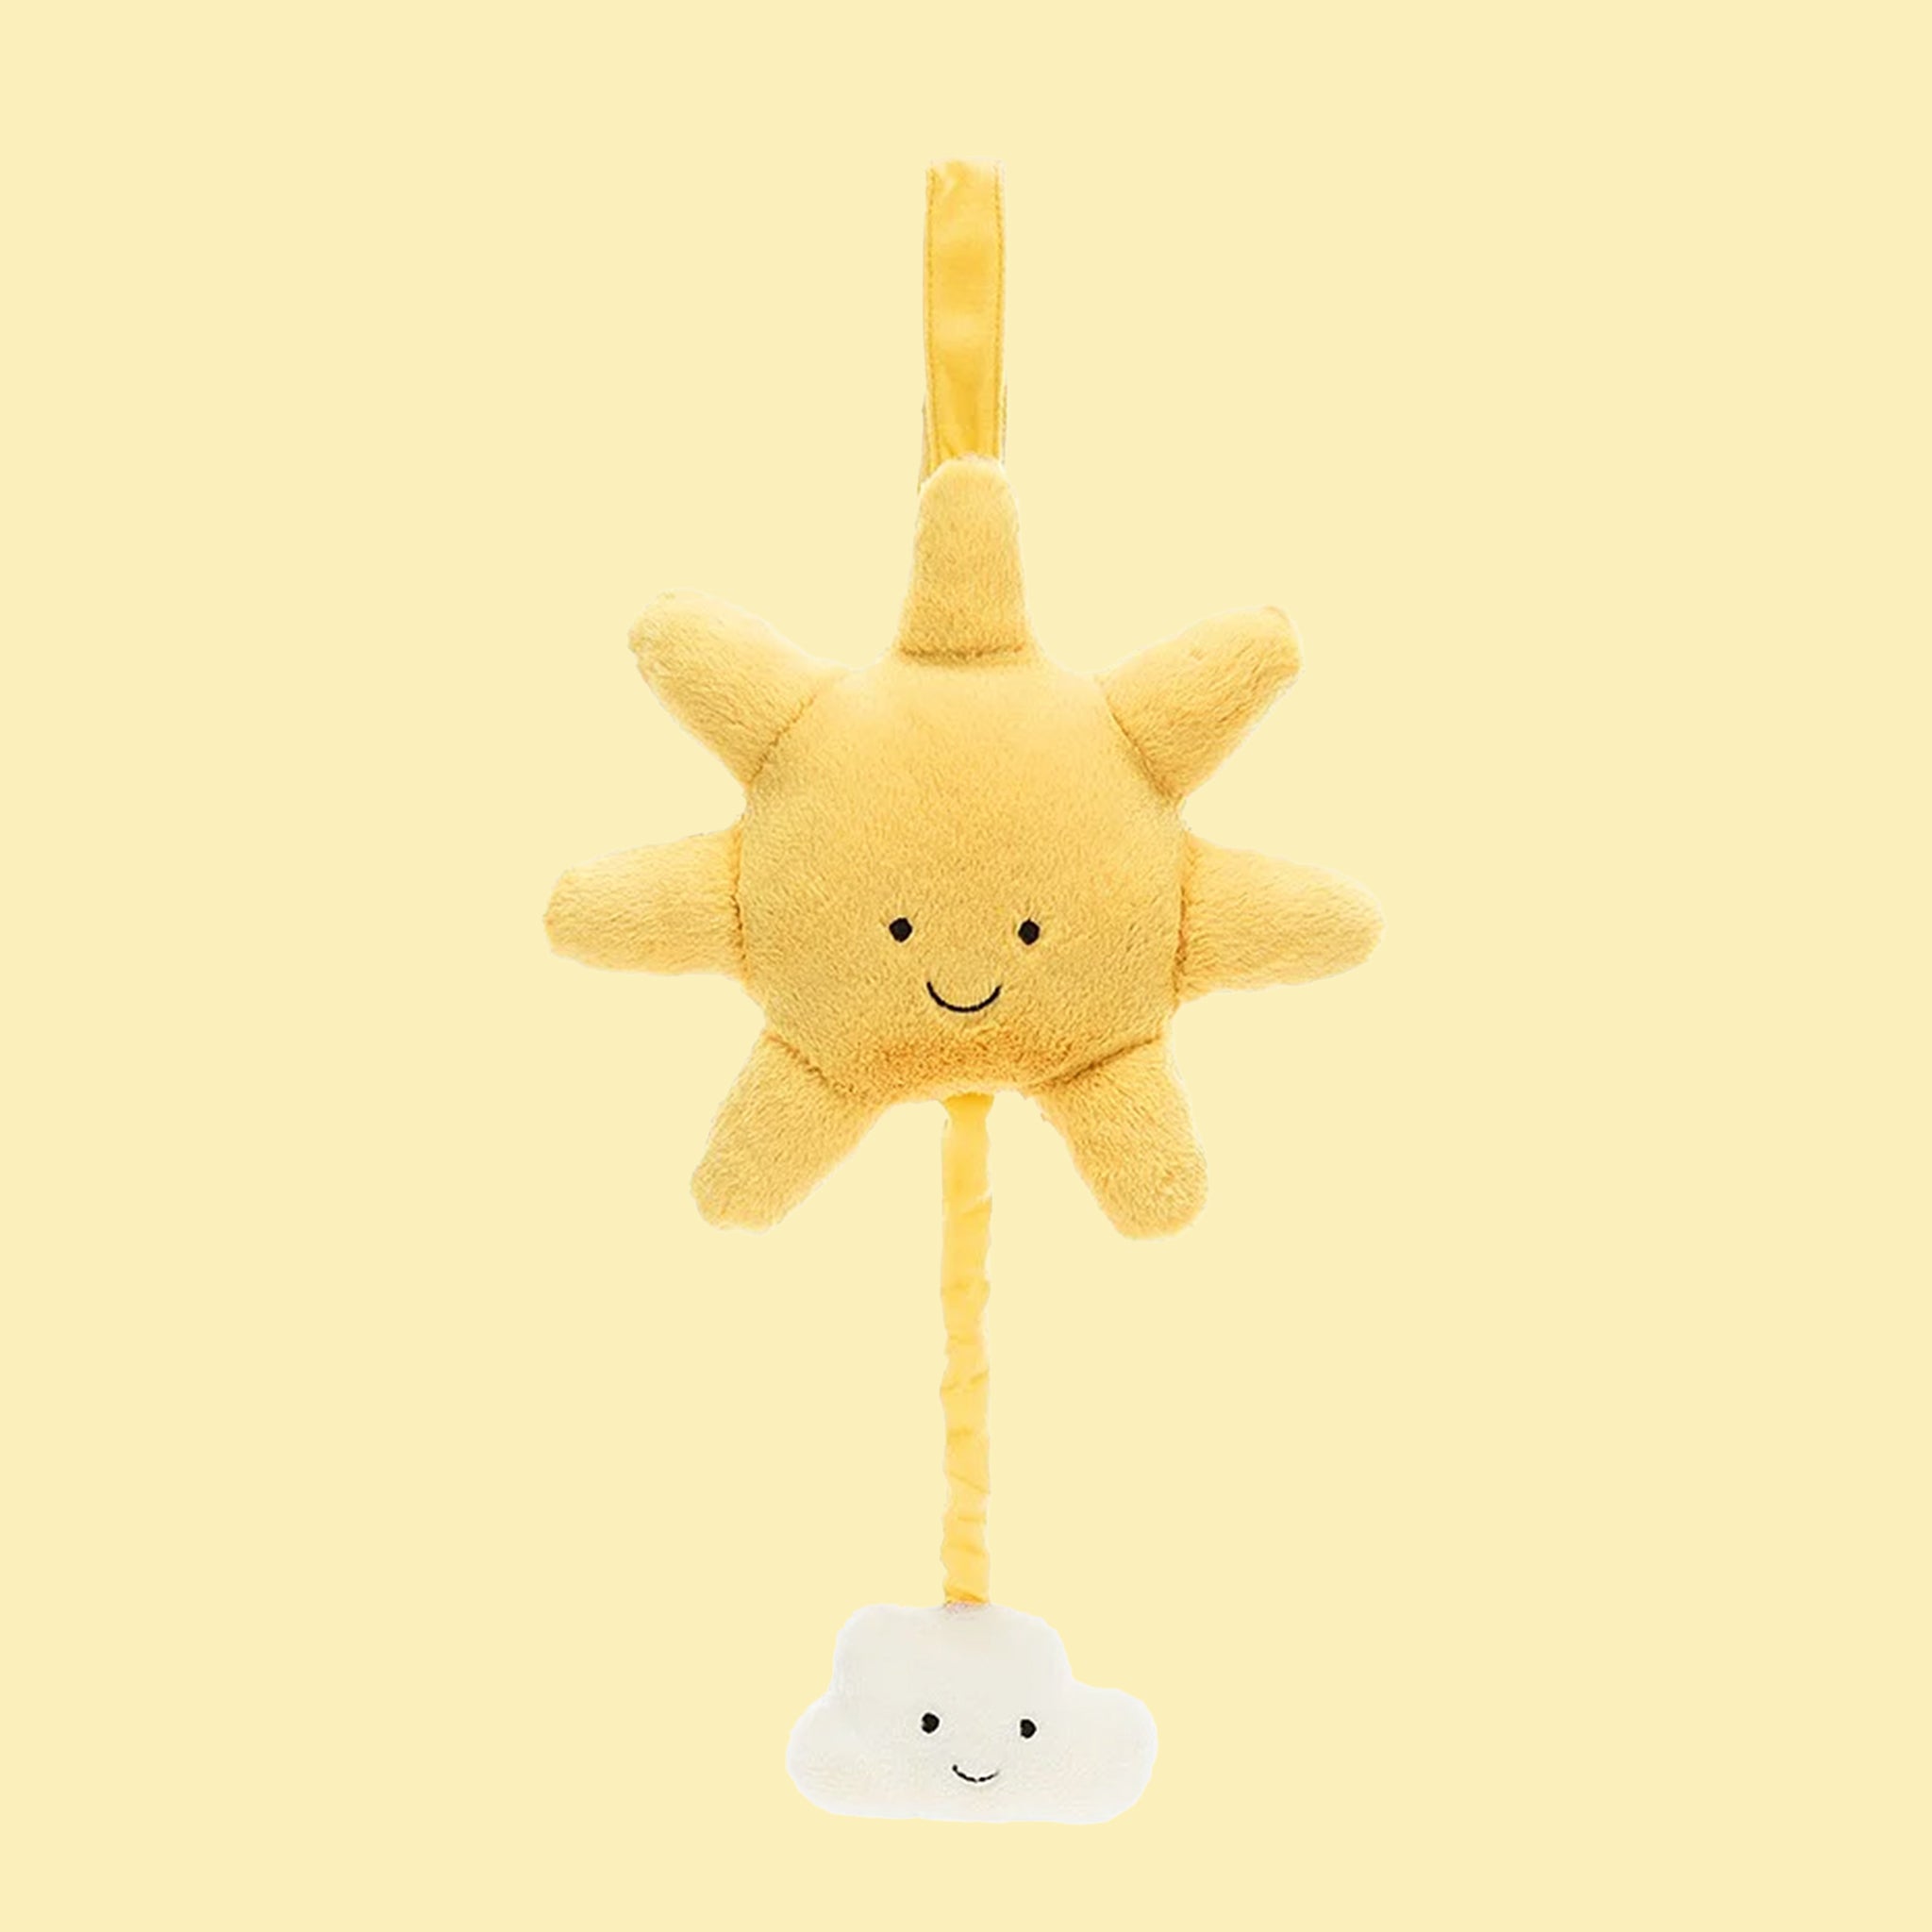 On a yellow background is a yellow sun and cloud shaped stuffed toy with a retractable pull and velcro loop for hanging.